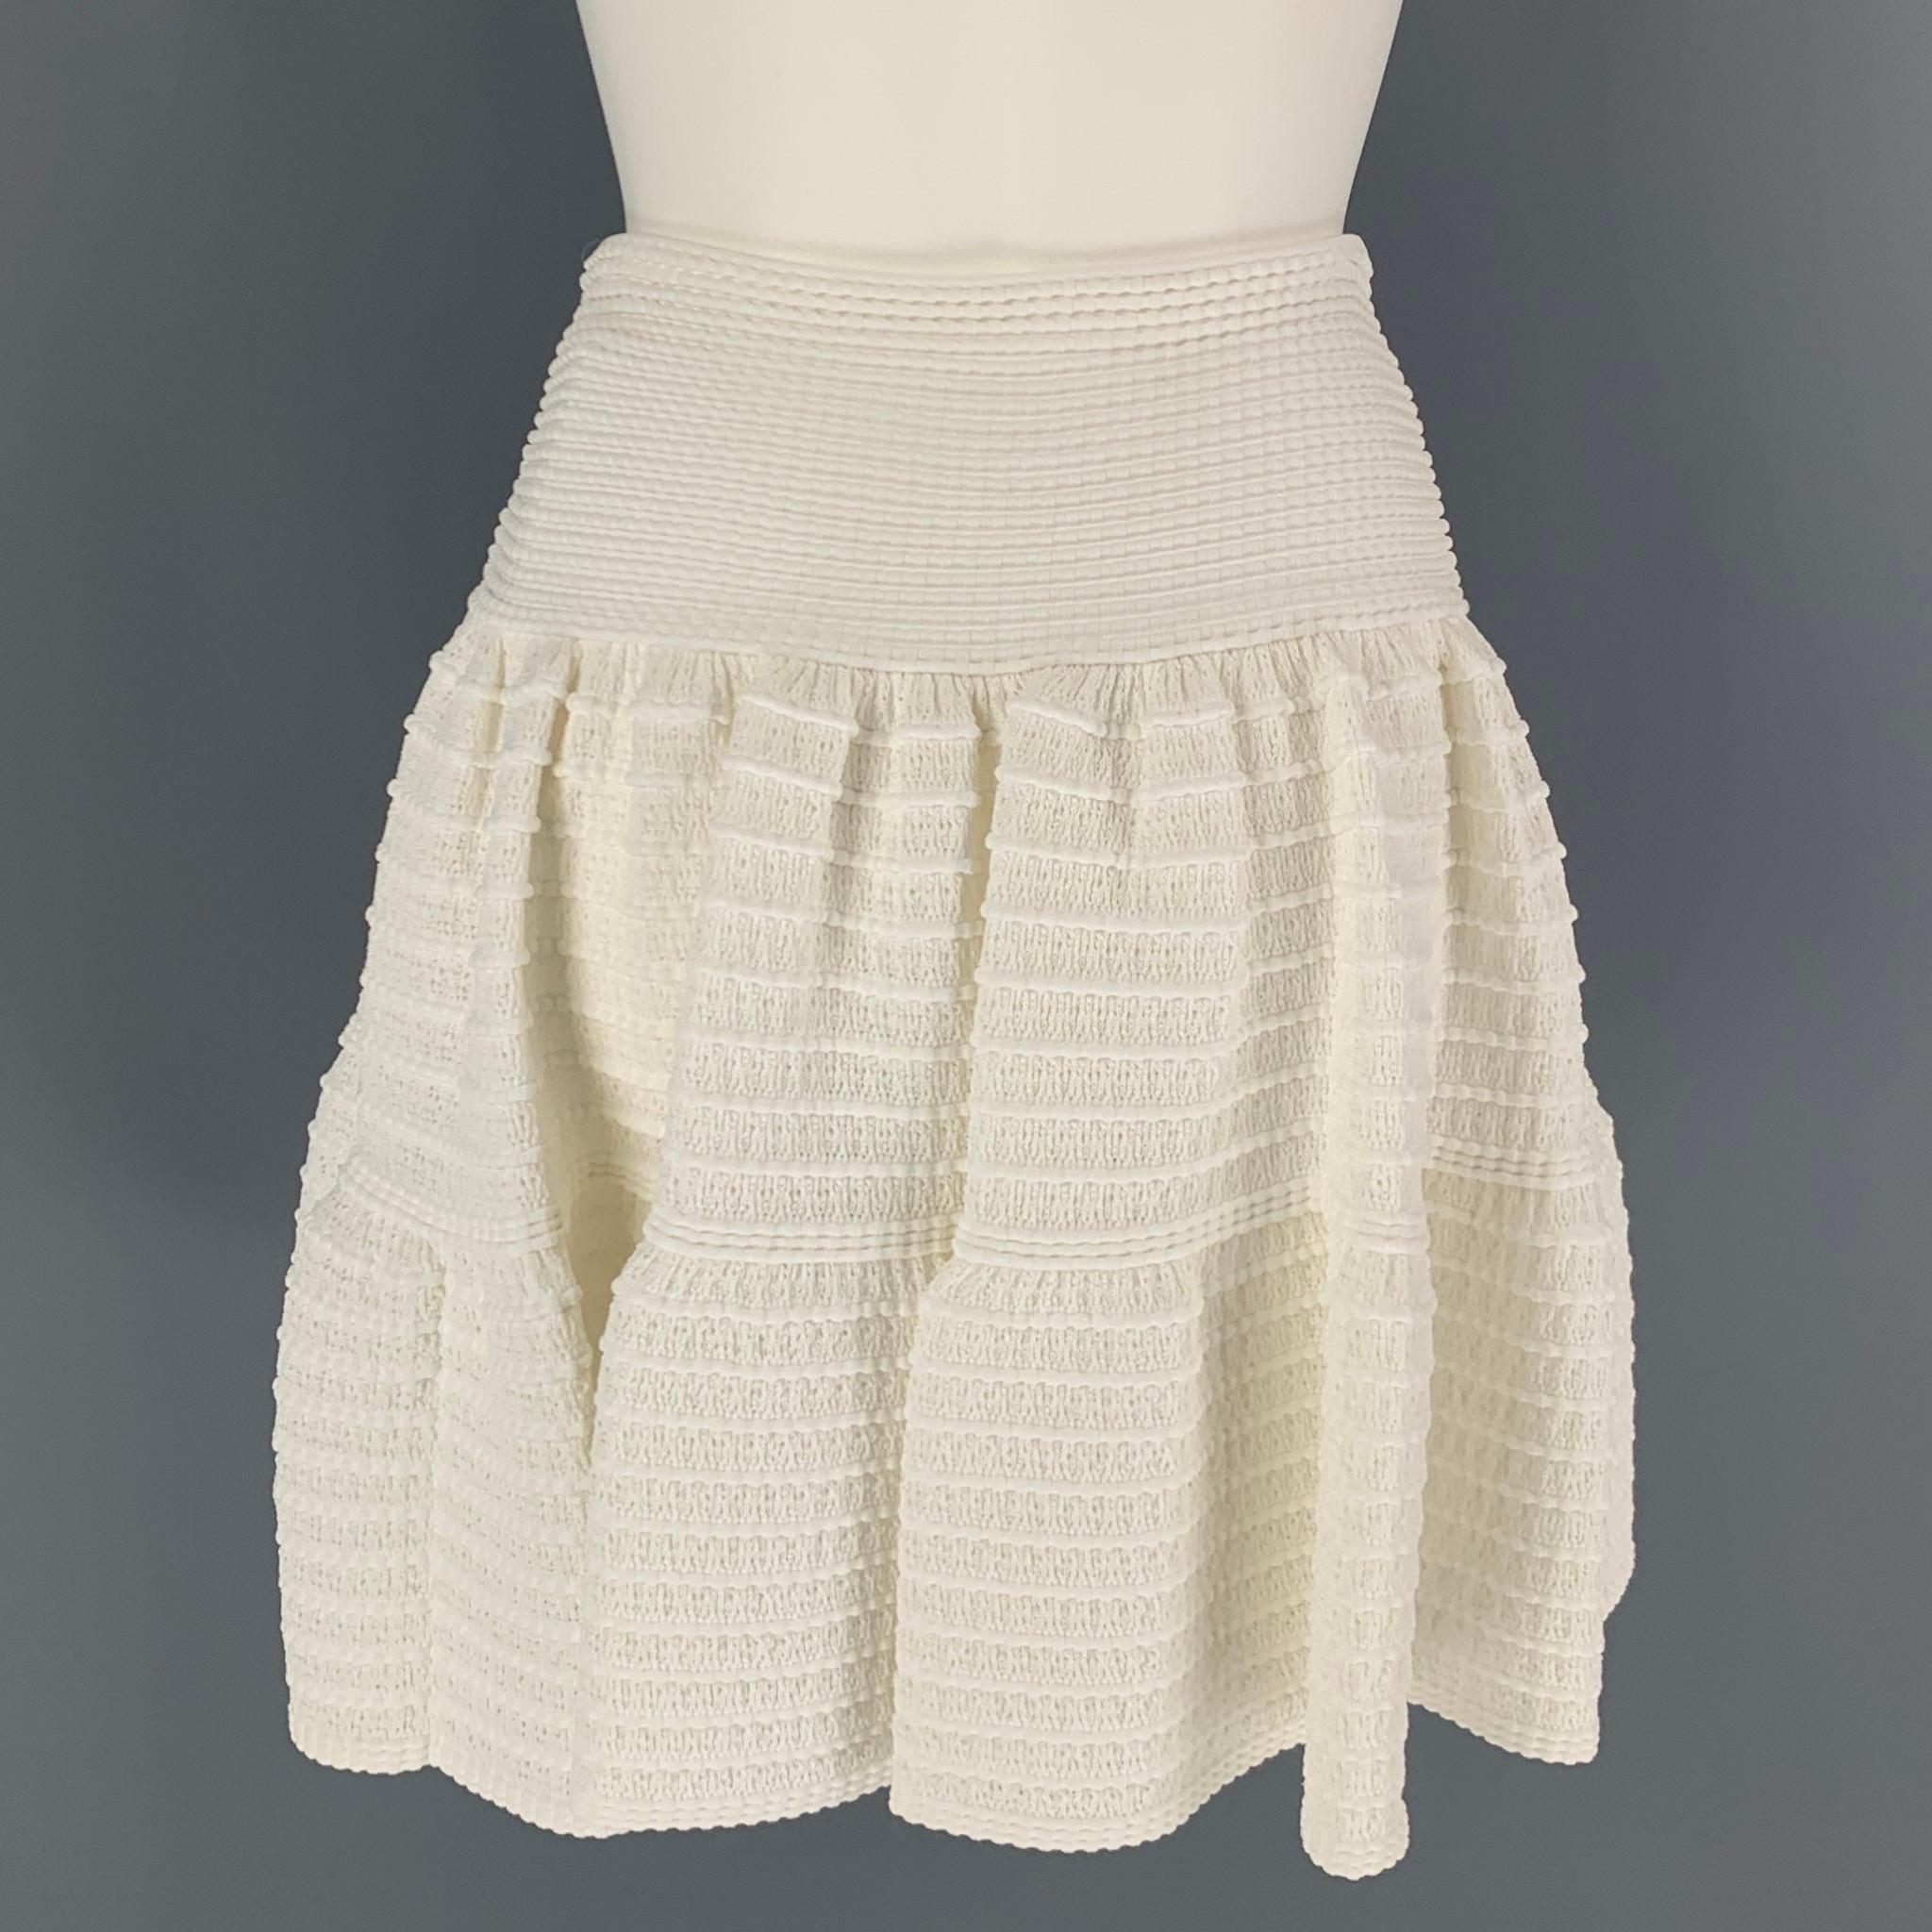 ALAIA skirt comes in a white knitted textured stretch cotton blend featuring a circle style and a elastic waist. Made in Italy. 

Very Good Pre-Owned Condition.
Marked: 38

Measurements:

Waist: 24 in.
Hip: 38 in.
Length: 19 in.